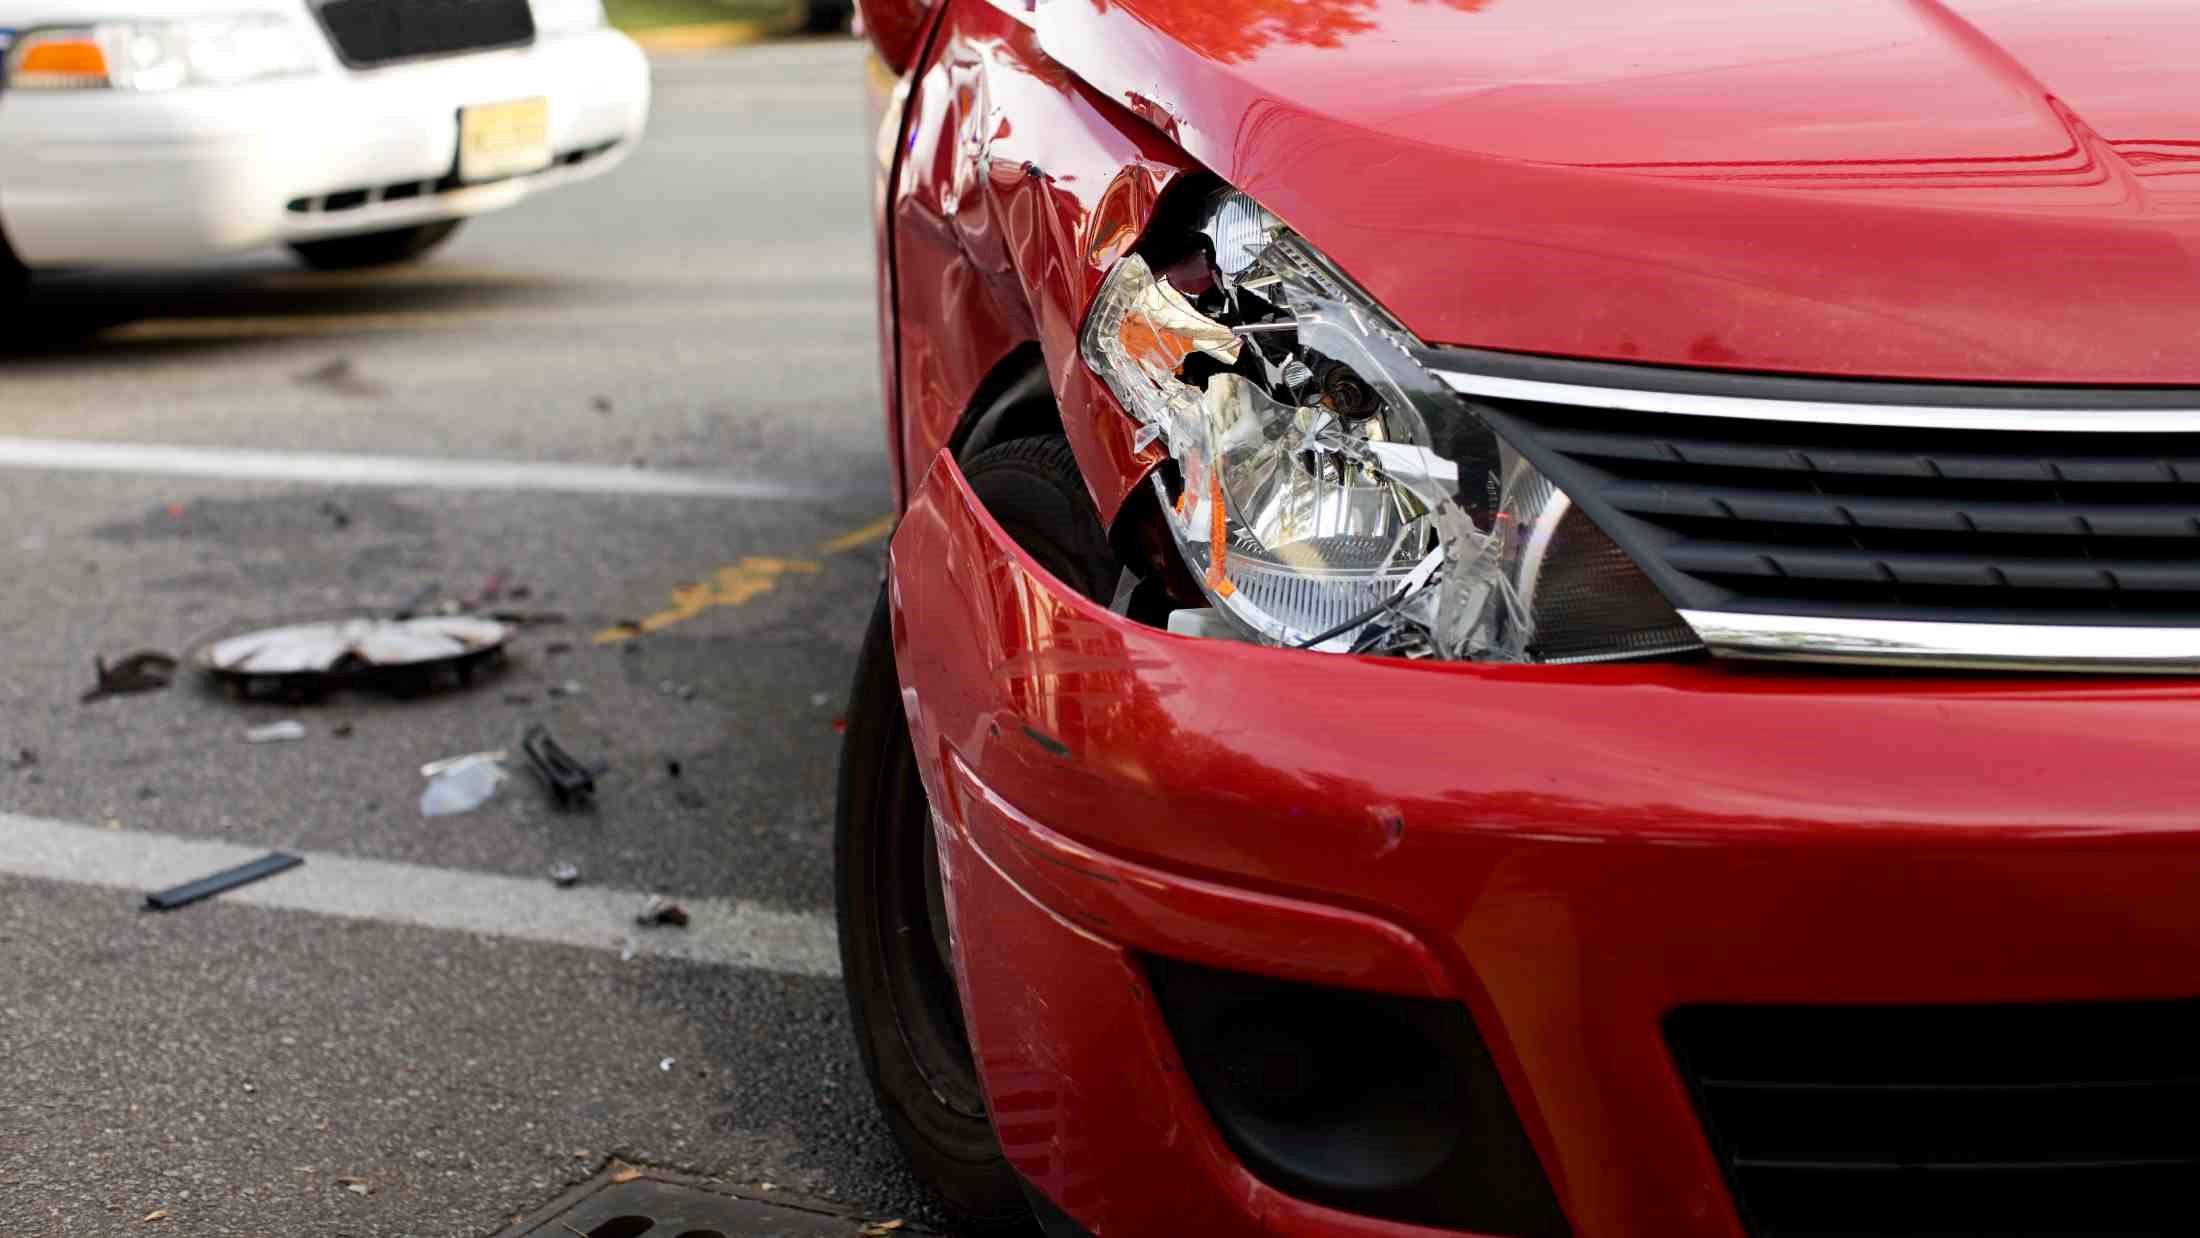 Damaged headlight after a car accident